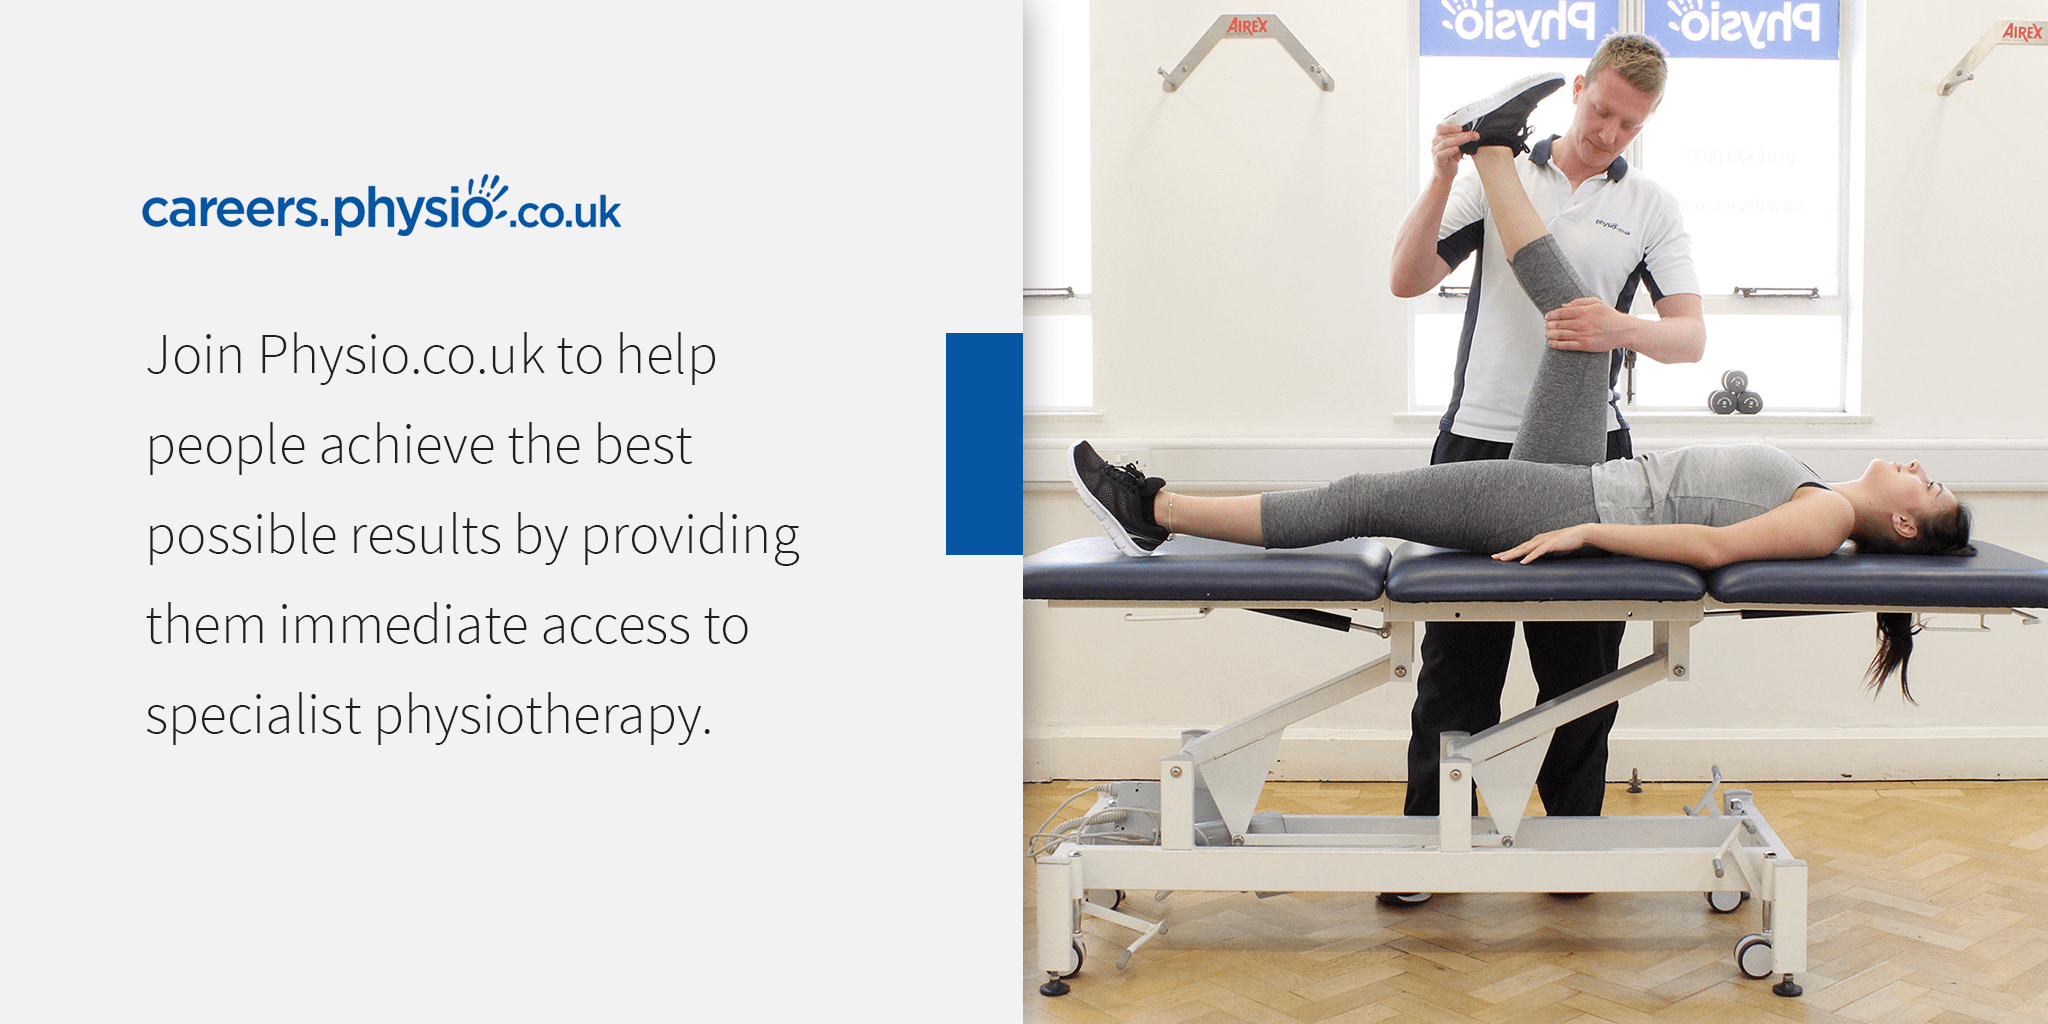 Visit careers.physio.co.uk to apply